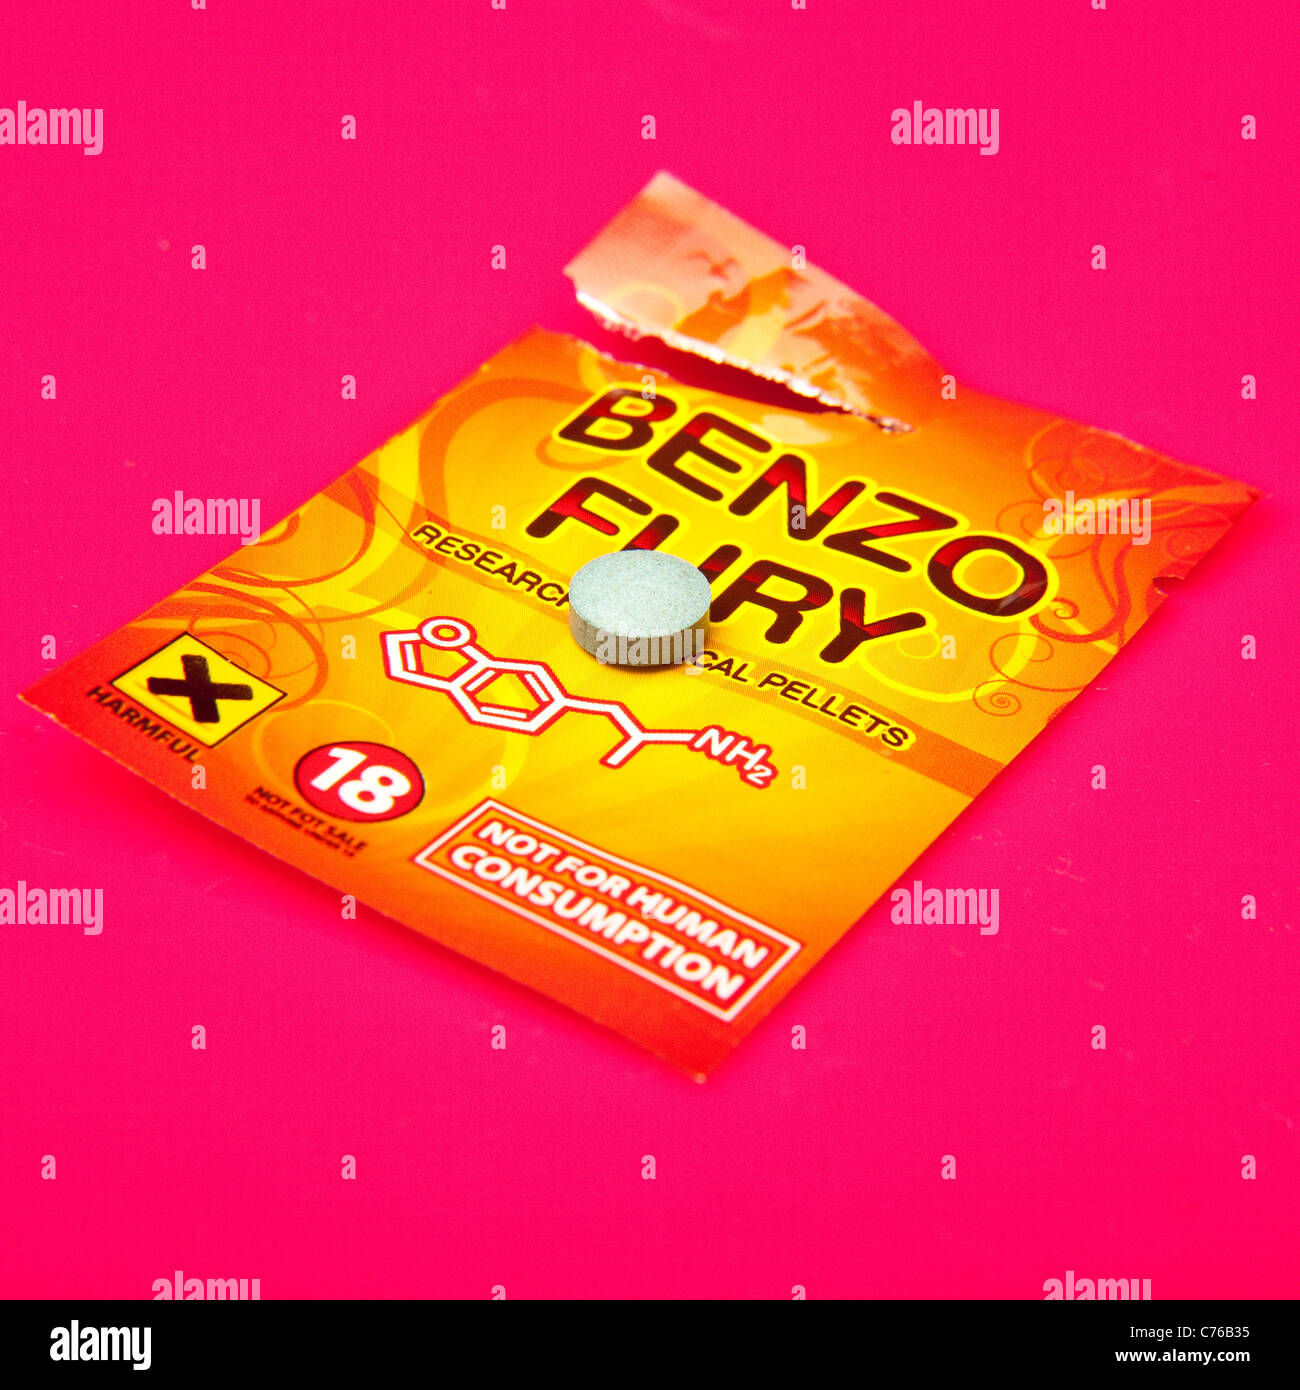 Packet of Benzo Fury,  6-APDB is a legal high or 'research chemical' with similar effects to the illegal drug MDMA and ecstasy. Stock Photo